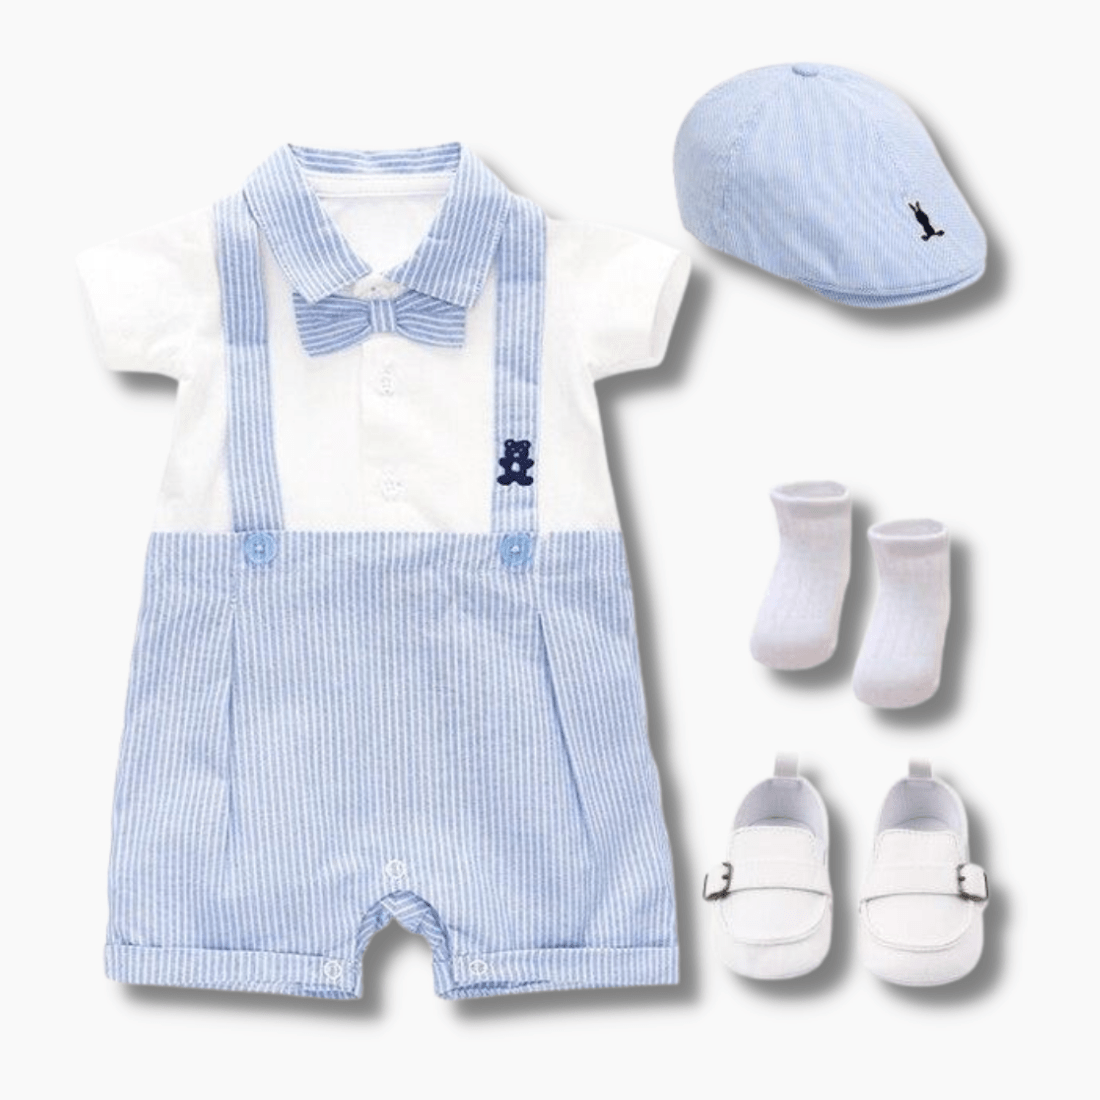 Boy's Clothing Blue Striped Baby Outfit